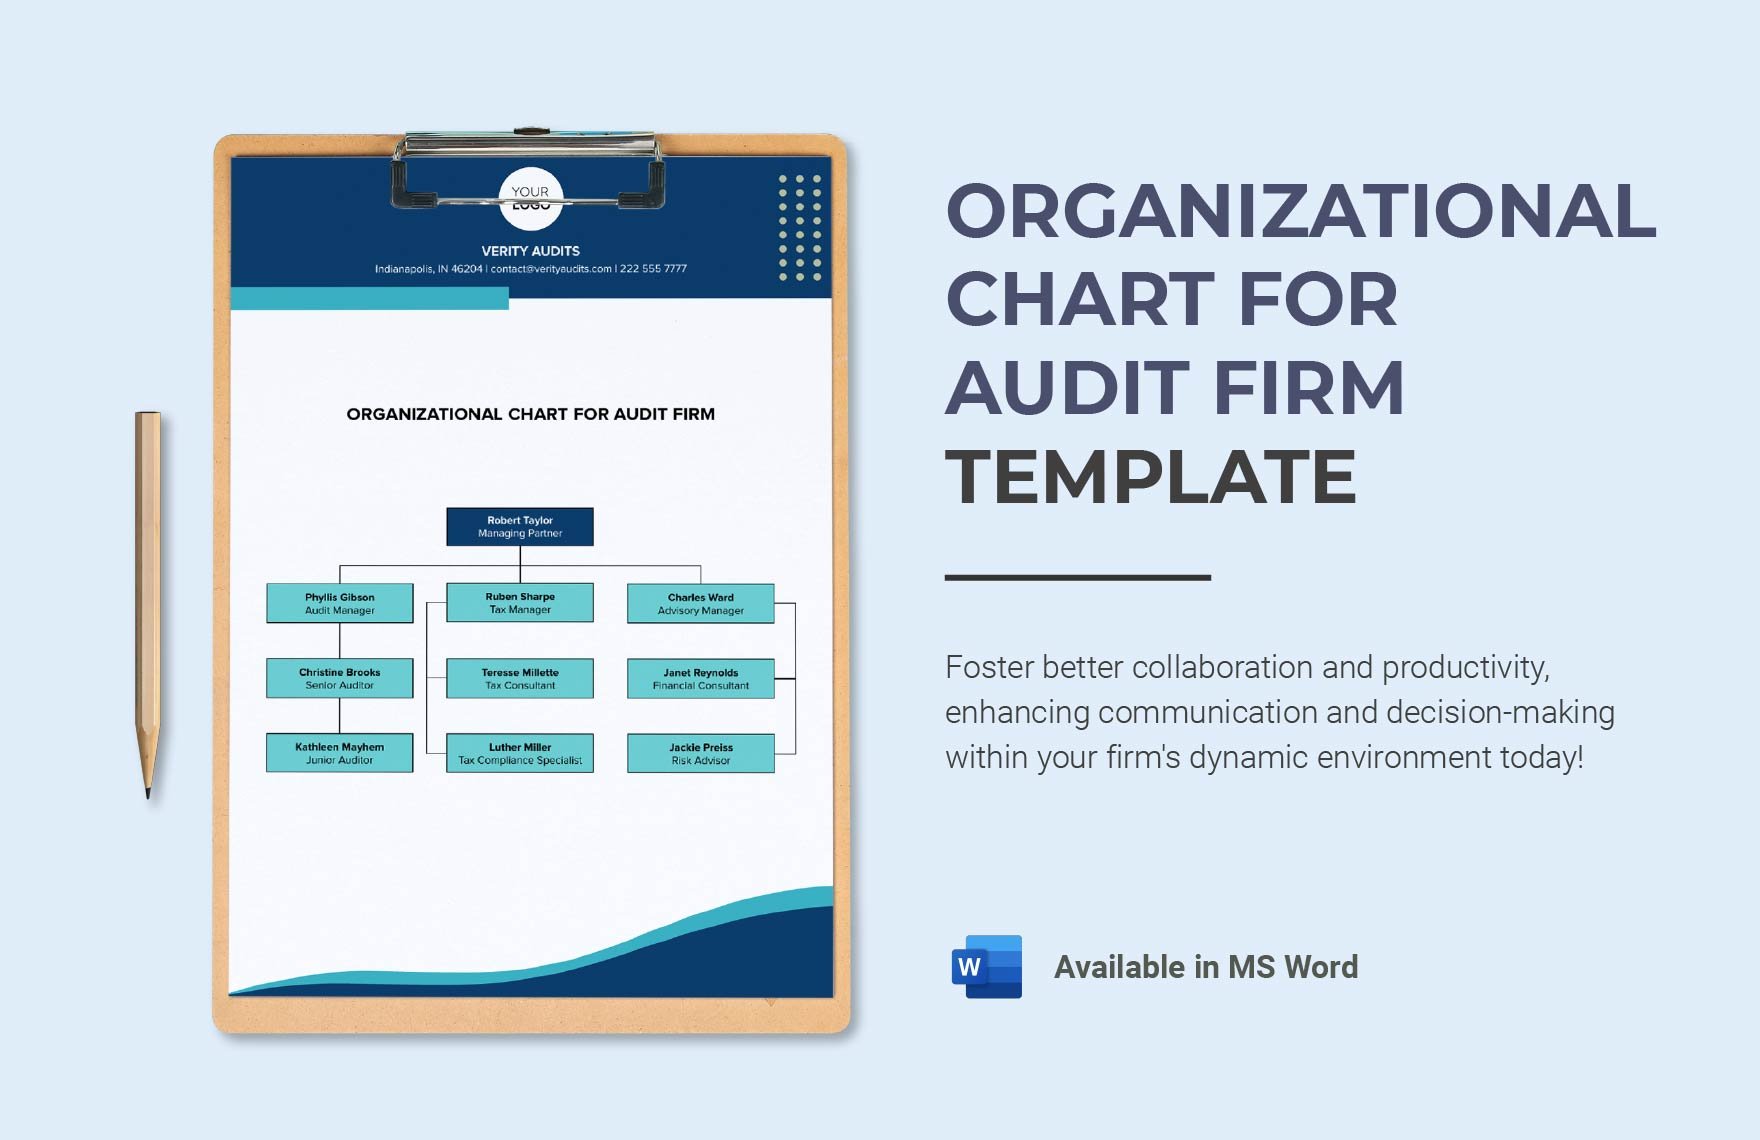 Organizational Chart for Audit Firm Template